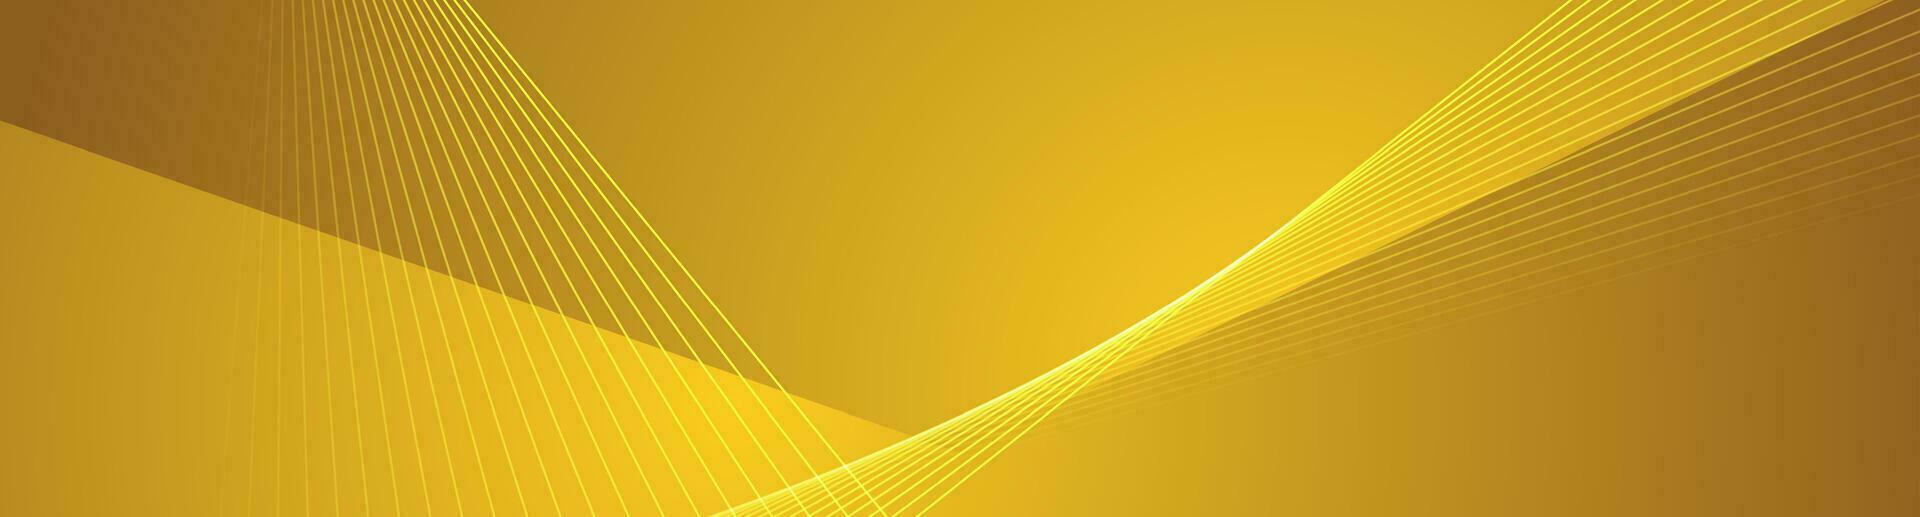 Minimal golden yellow geometry banner with stripes and lines vector